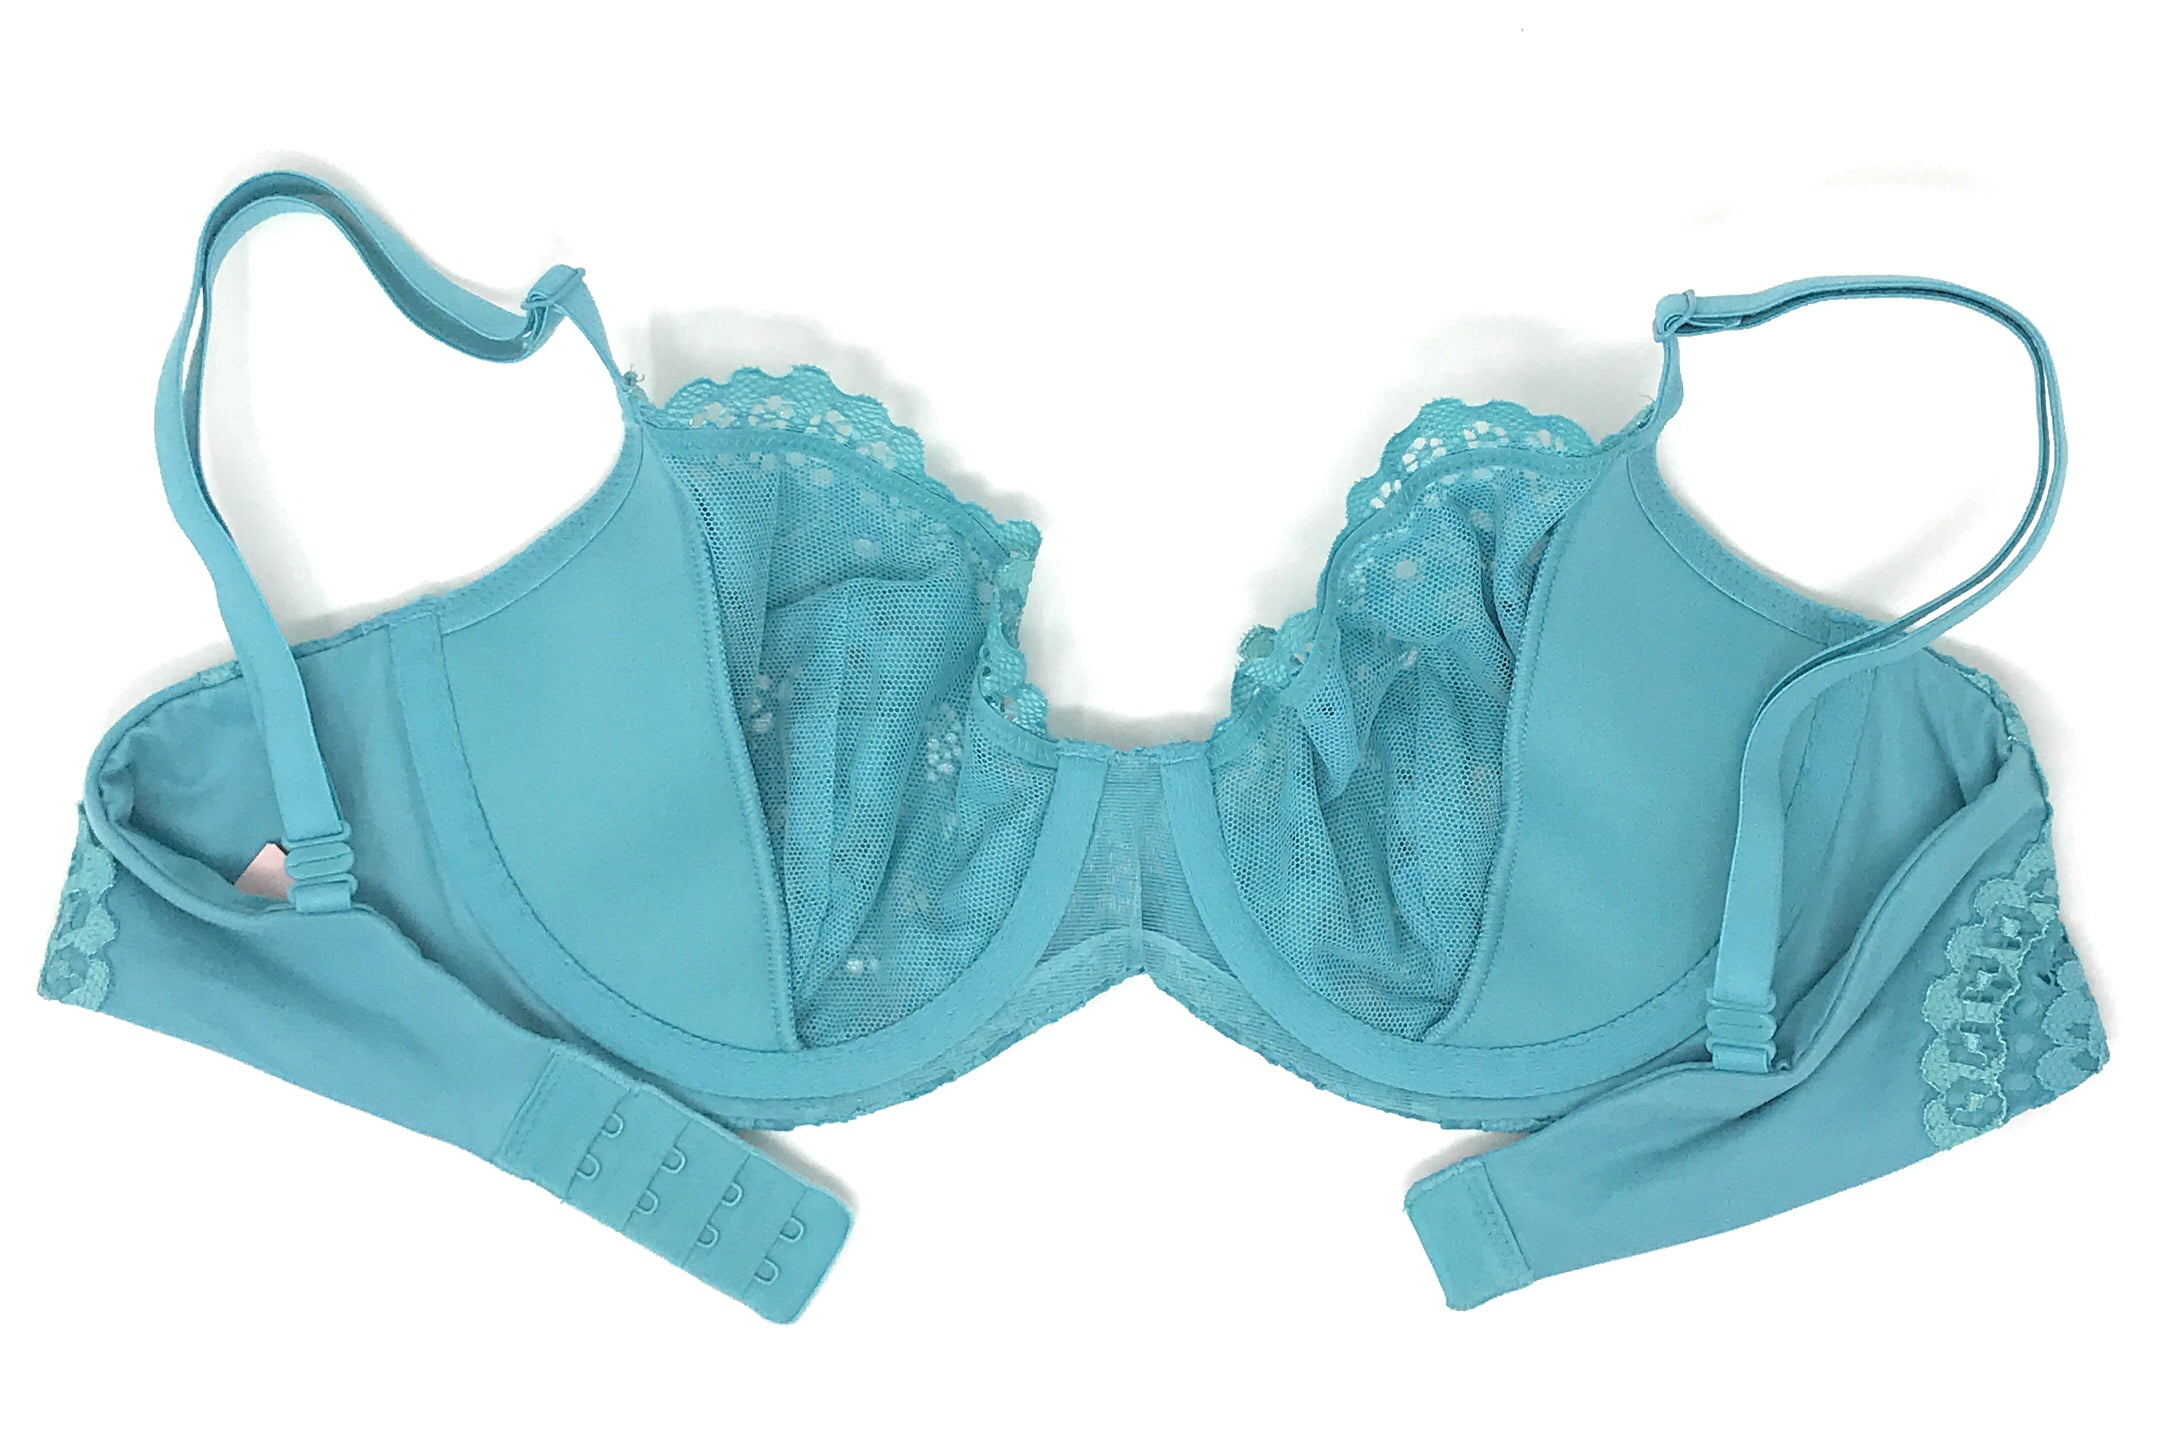 Find more 32ddd Victoria's Secret Dream Angels Lined Demi (34dd Sister Size)  for sale at up to 90% off